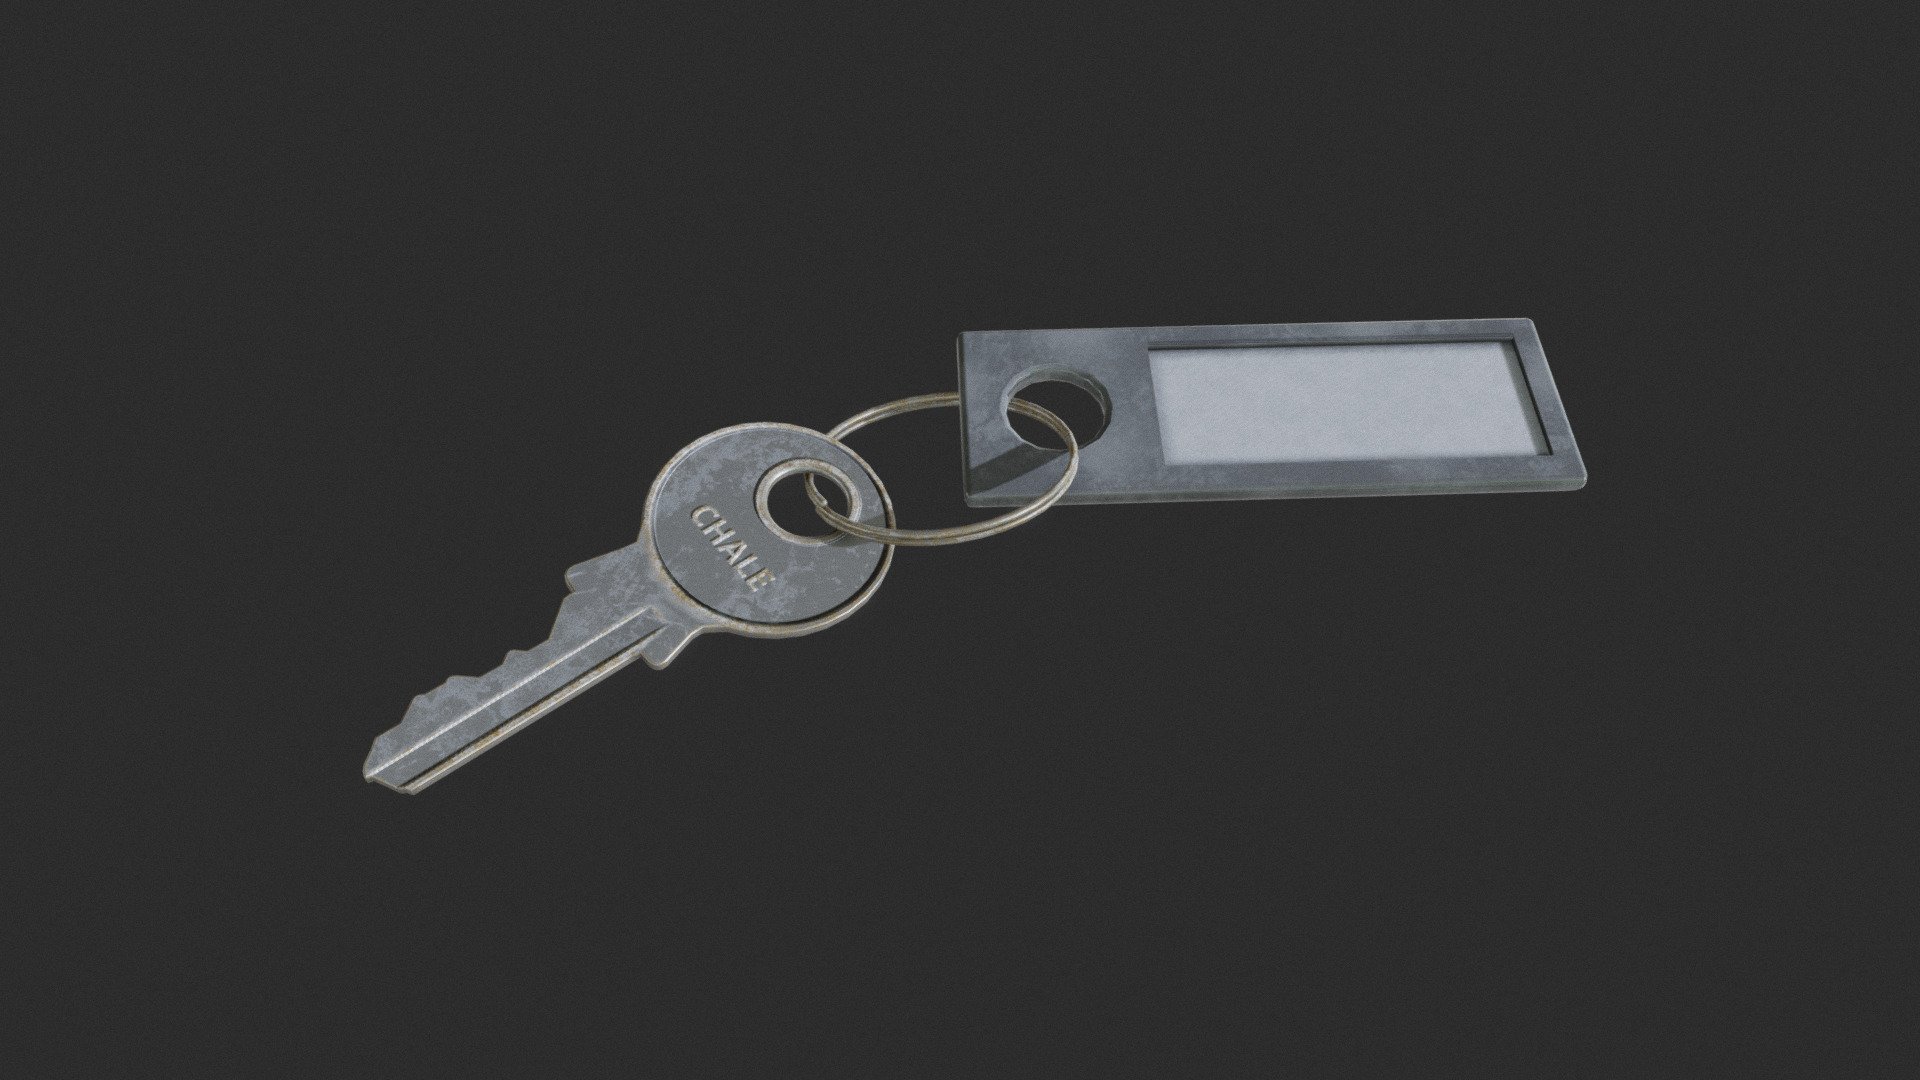 Game ready PBR key with tag

Feel free to use it in any project! - Key with Tag - Download Free 3D model by AxonDesigns 3d model